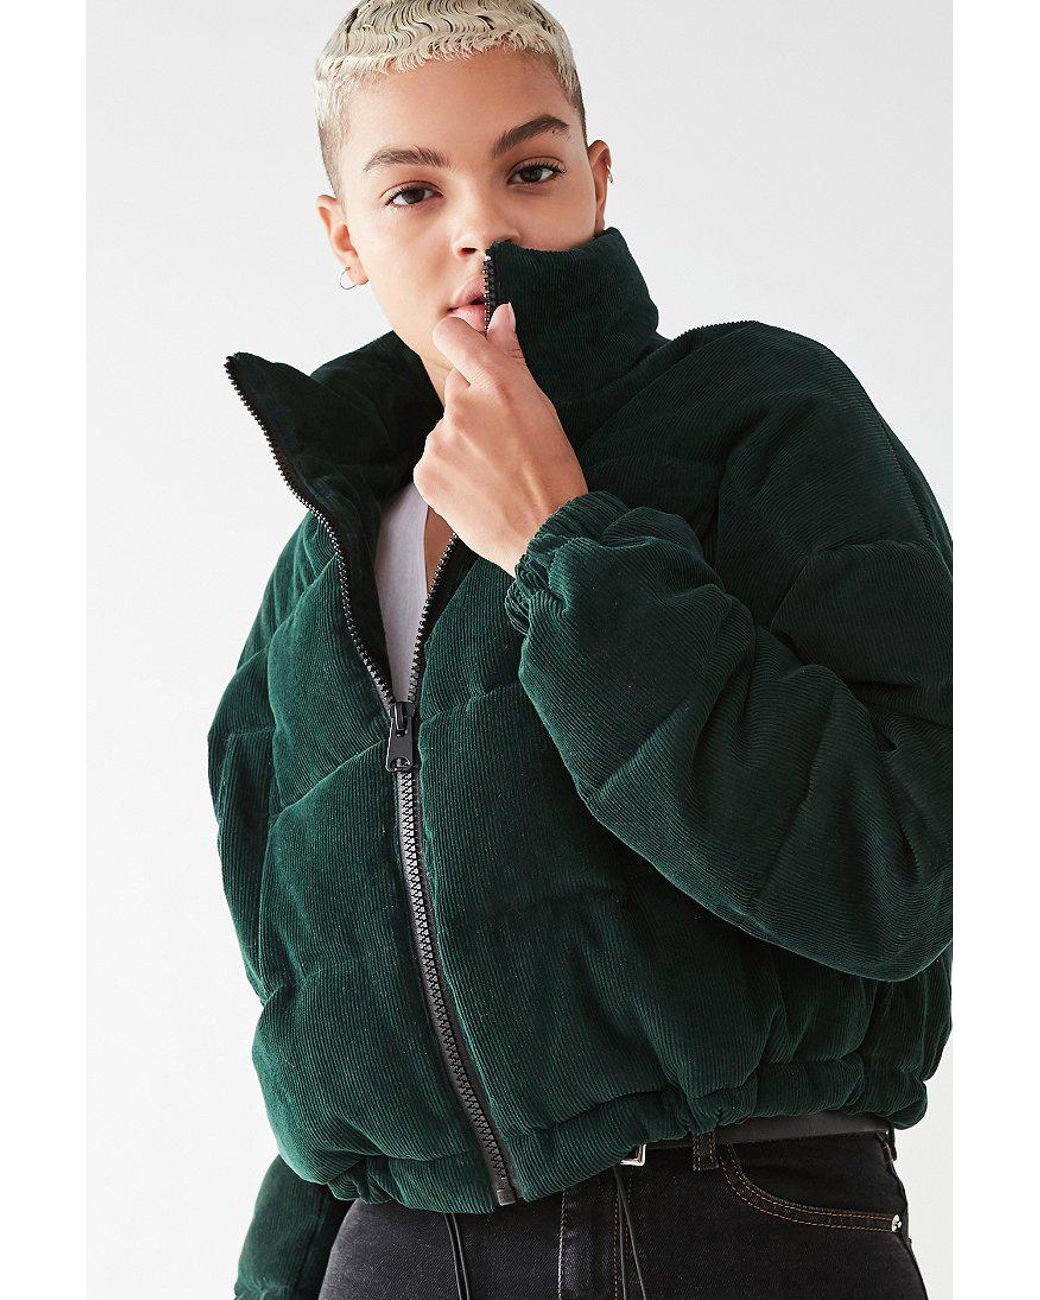 Urban Outfitters Uo Corduroy Puffer Jacket in Dark Green (Green) | Lyst